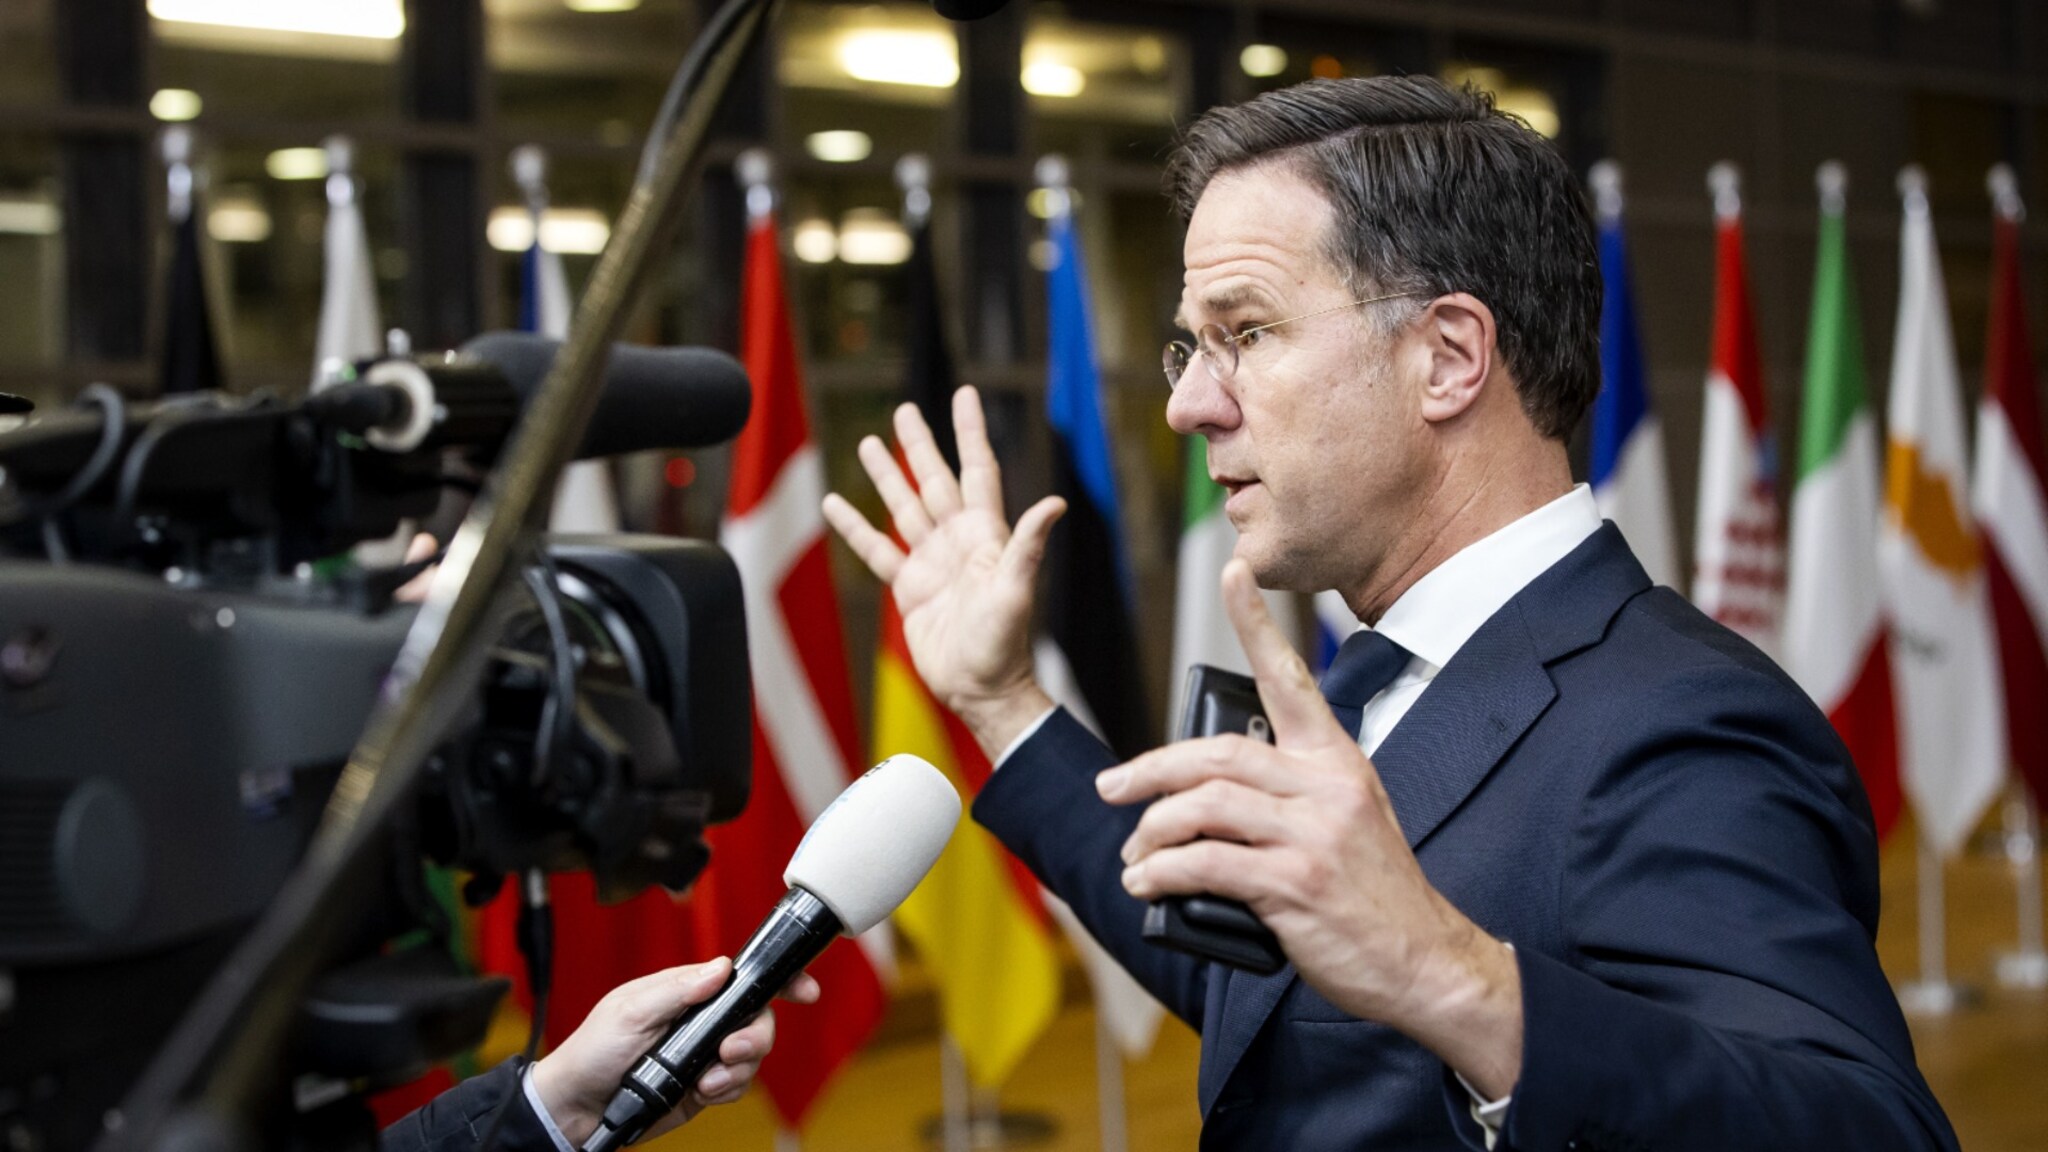 Rutte after EU summit: Do not ignore Russia’s energy for now, ‘US has understanding’